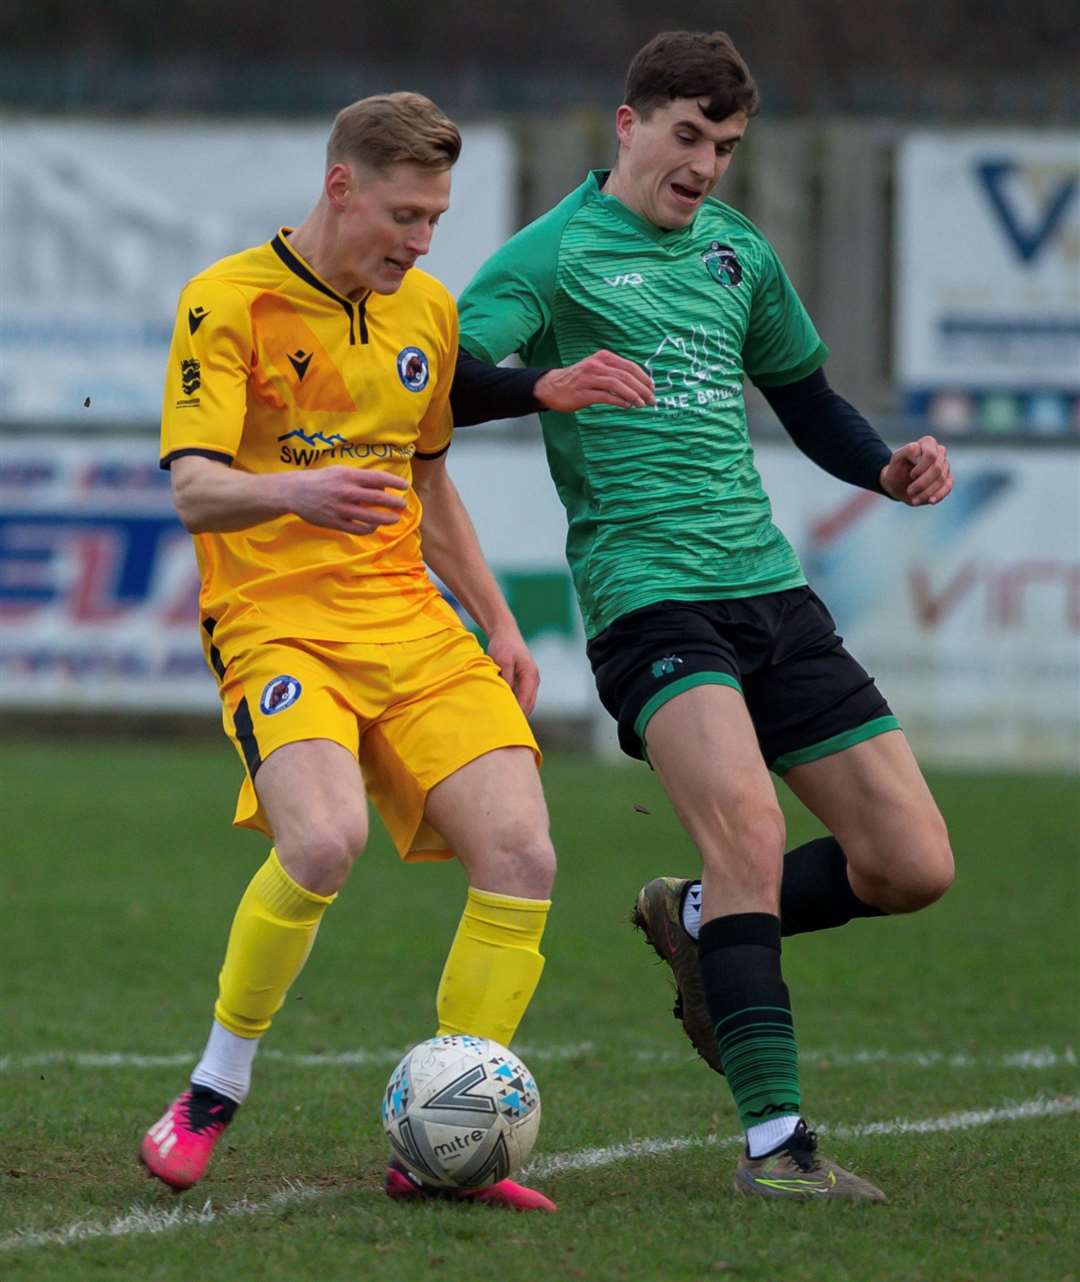 Ollie Freeman (yellow) in action for Bearsted at Welling Town. Picture: Ian Scammell